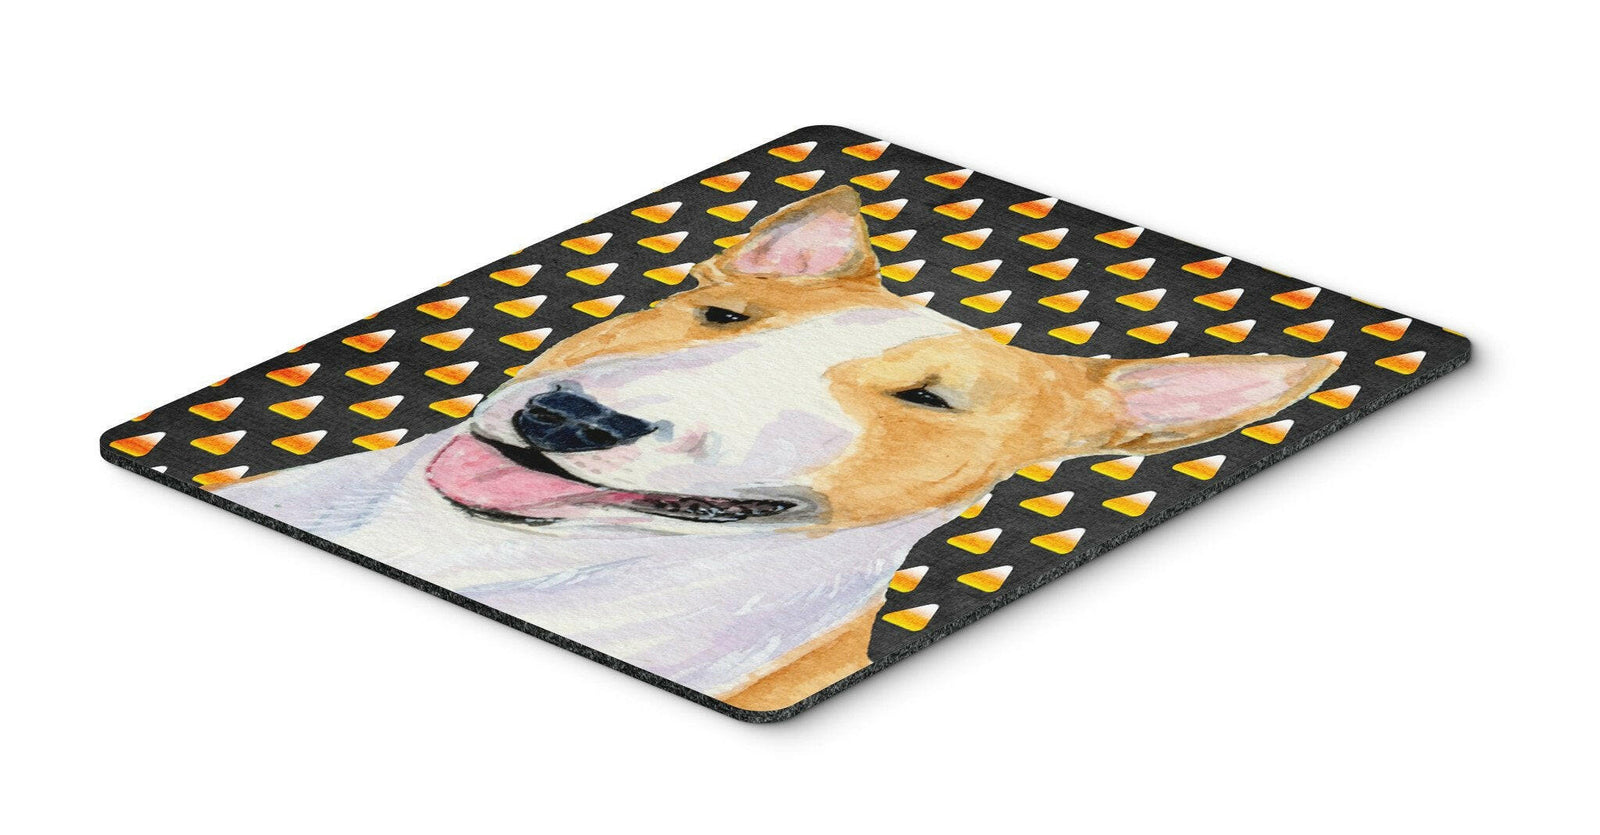 Bull Terrier Candy Corn Halloween Portrait Mouse Pad, Hot Pad or Trivet by Caroline's Treasures